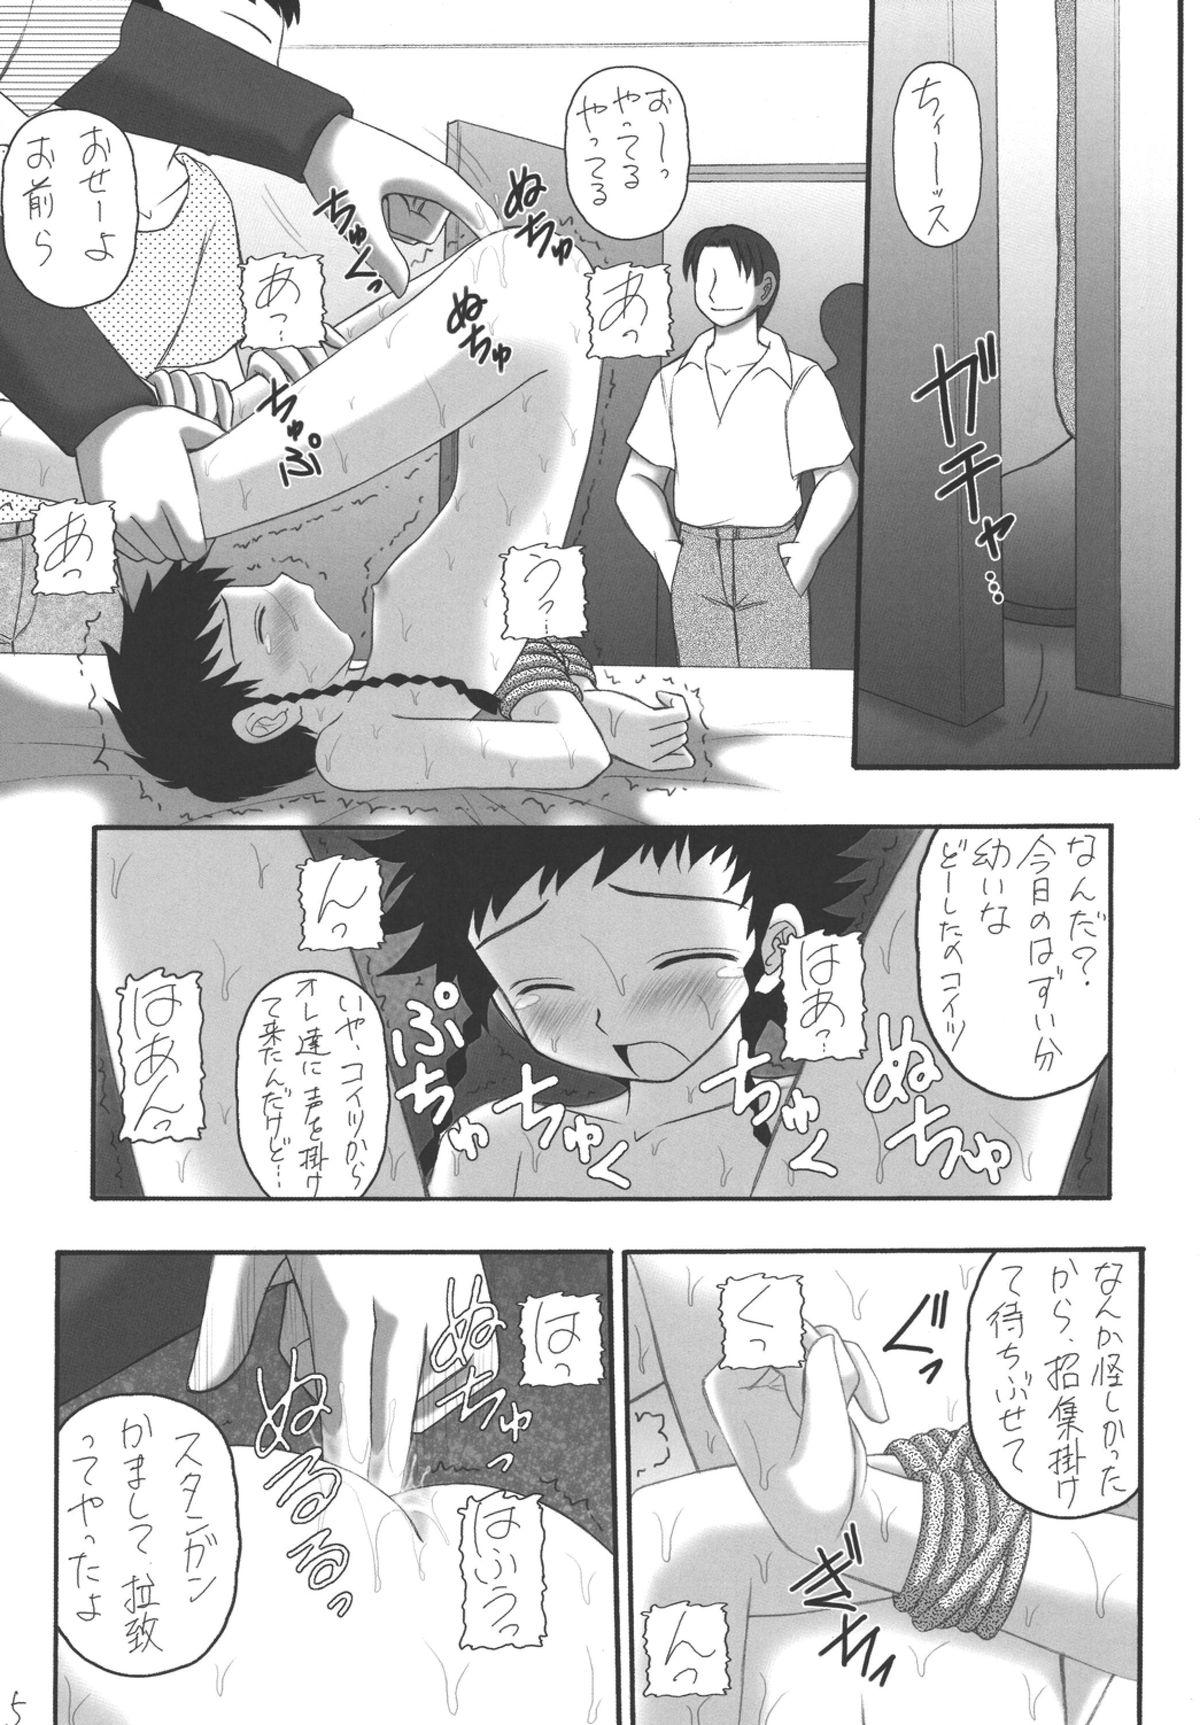 Amazing My Hime - Mai-hime Rough - Page 5